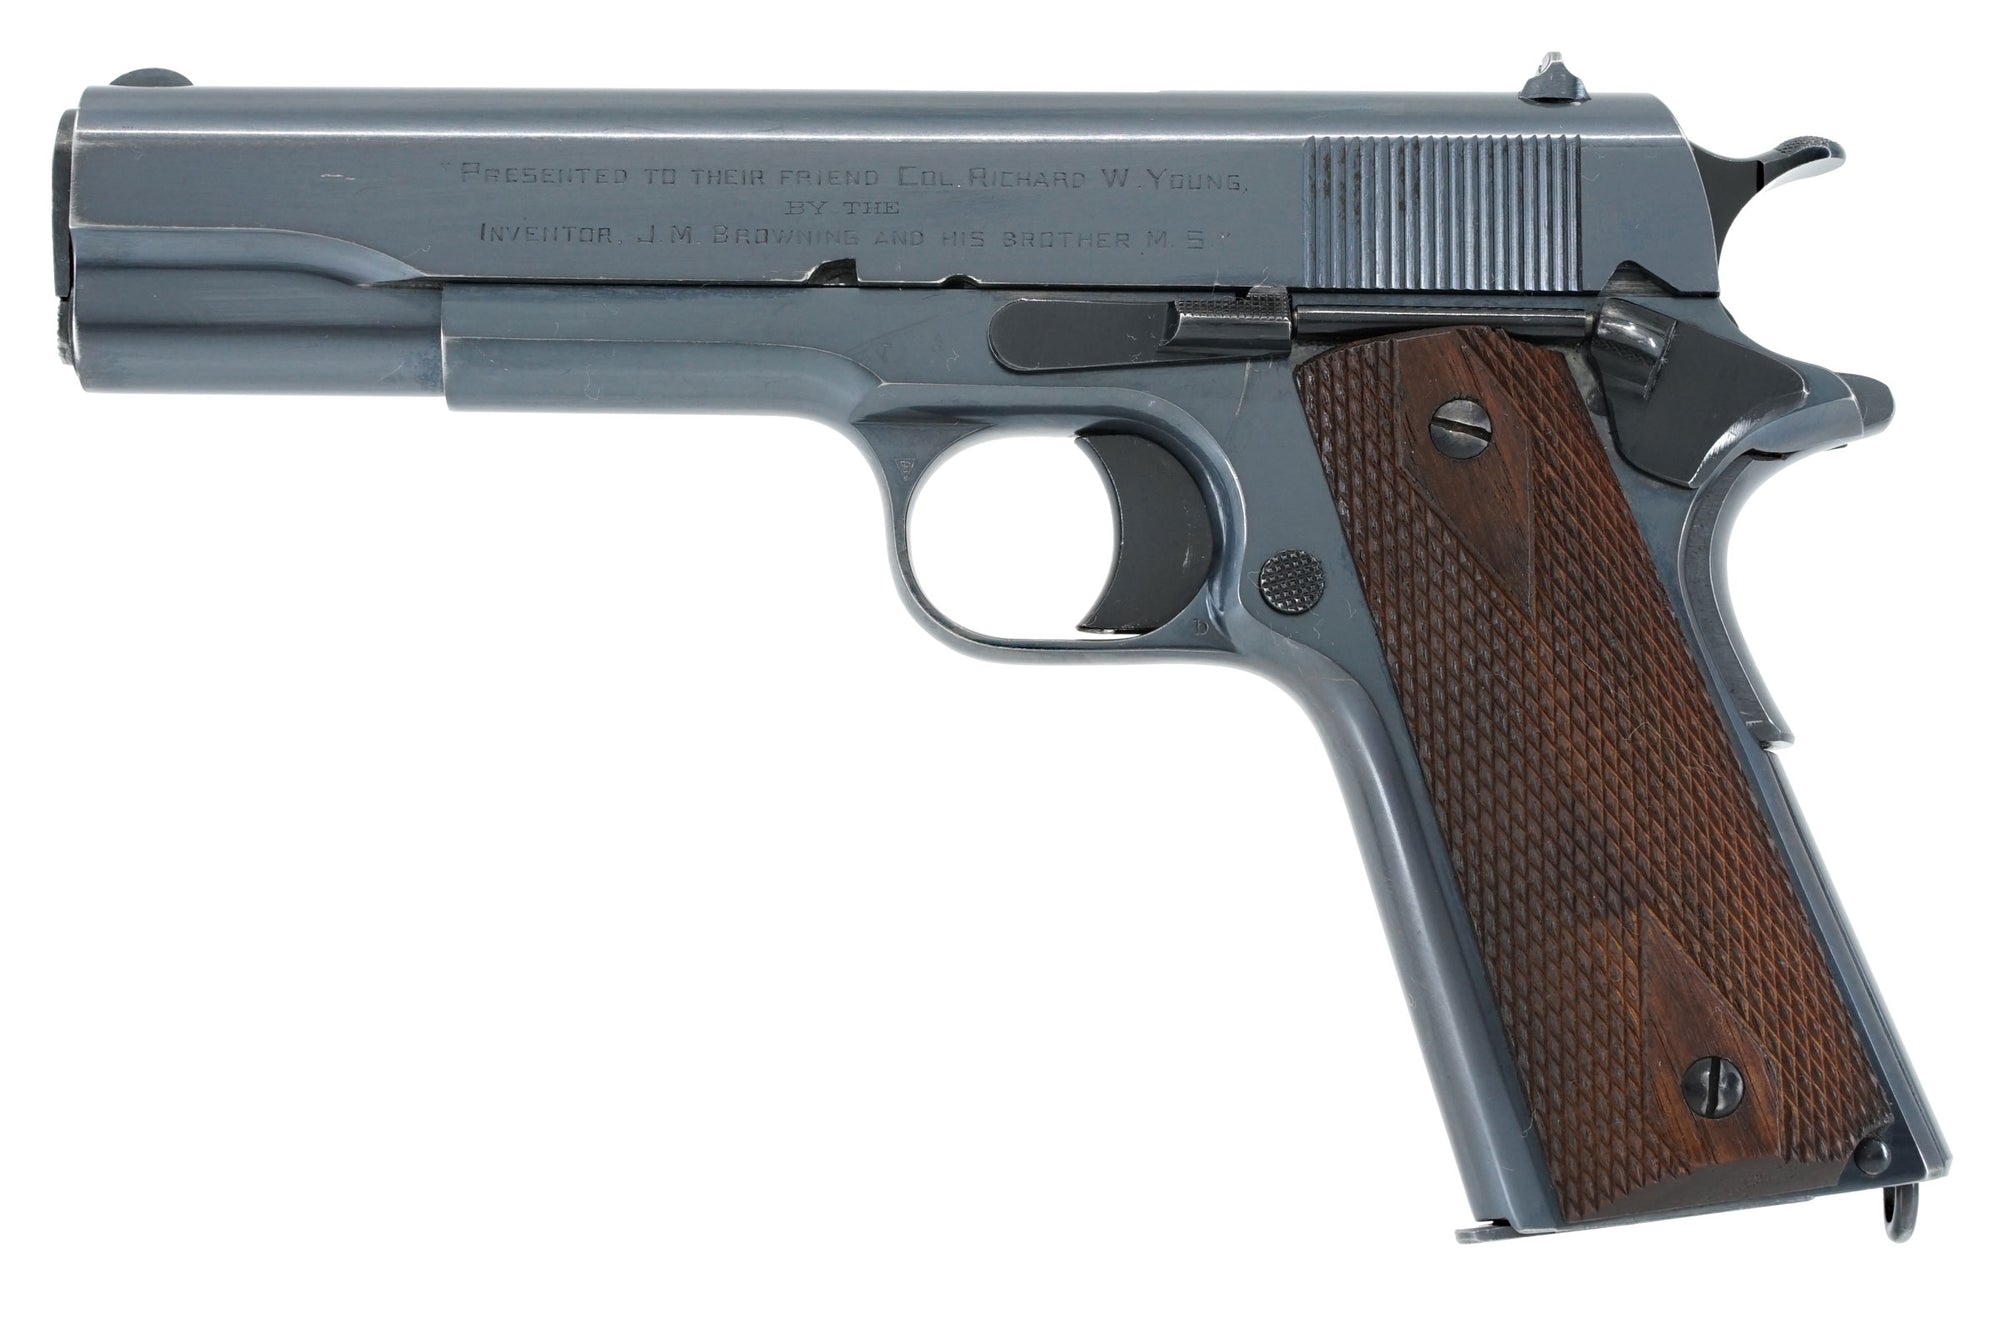 Colt Government Model 45ACP SN:C101411 MFG:1918 - Young-Browning Presentation